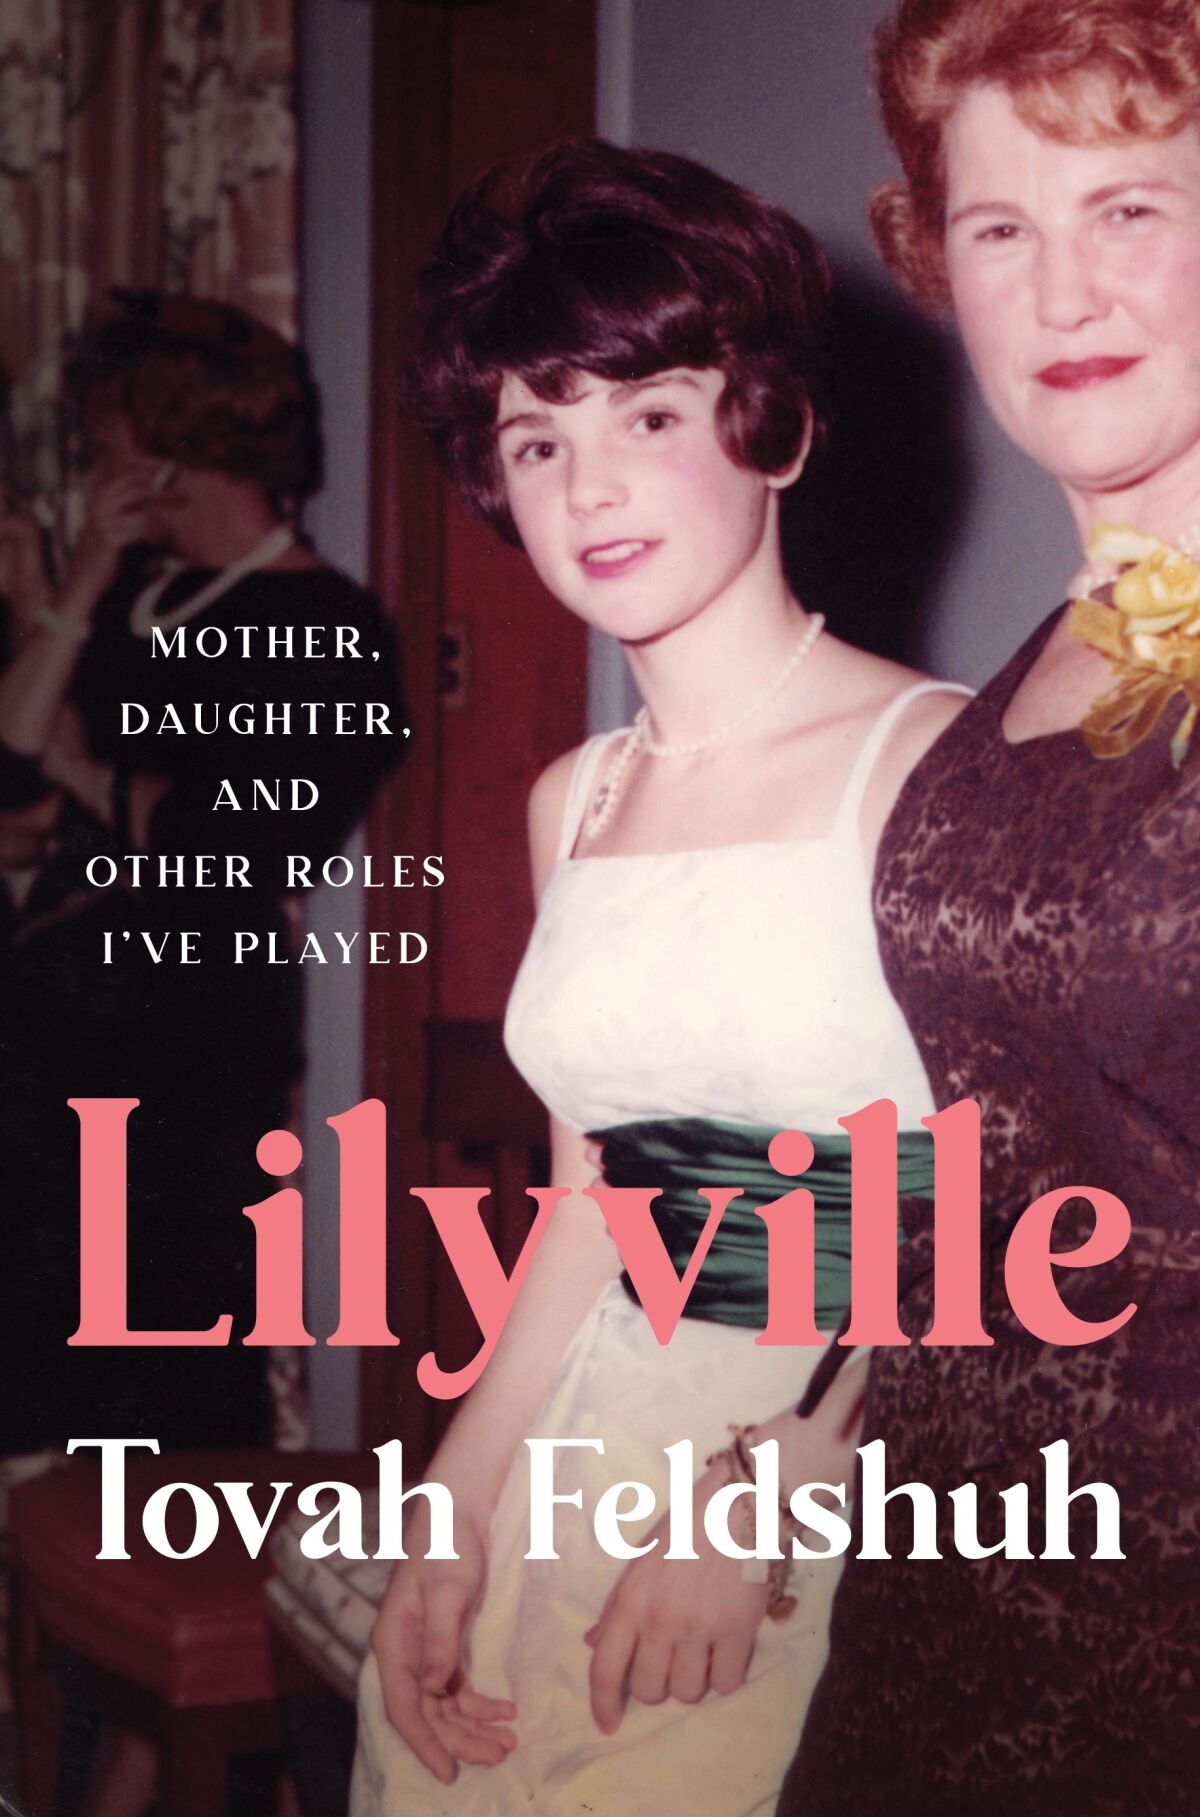 Tovah Feldshuh's 2021 memoir, "Lilyville: Mother, Daughter and Other Roles I've Played."